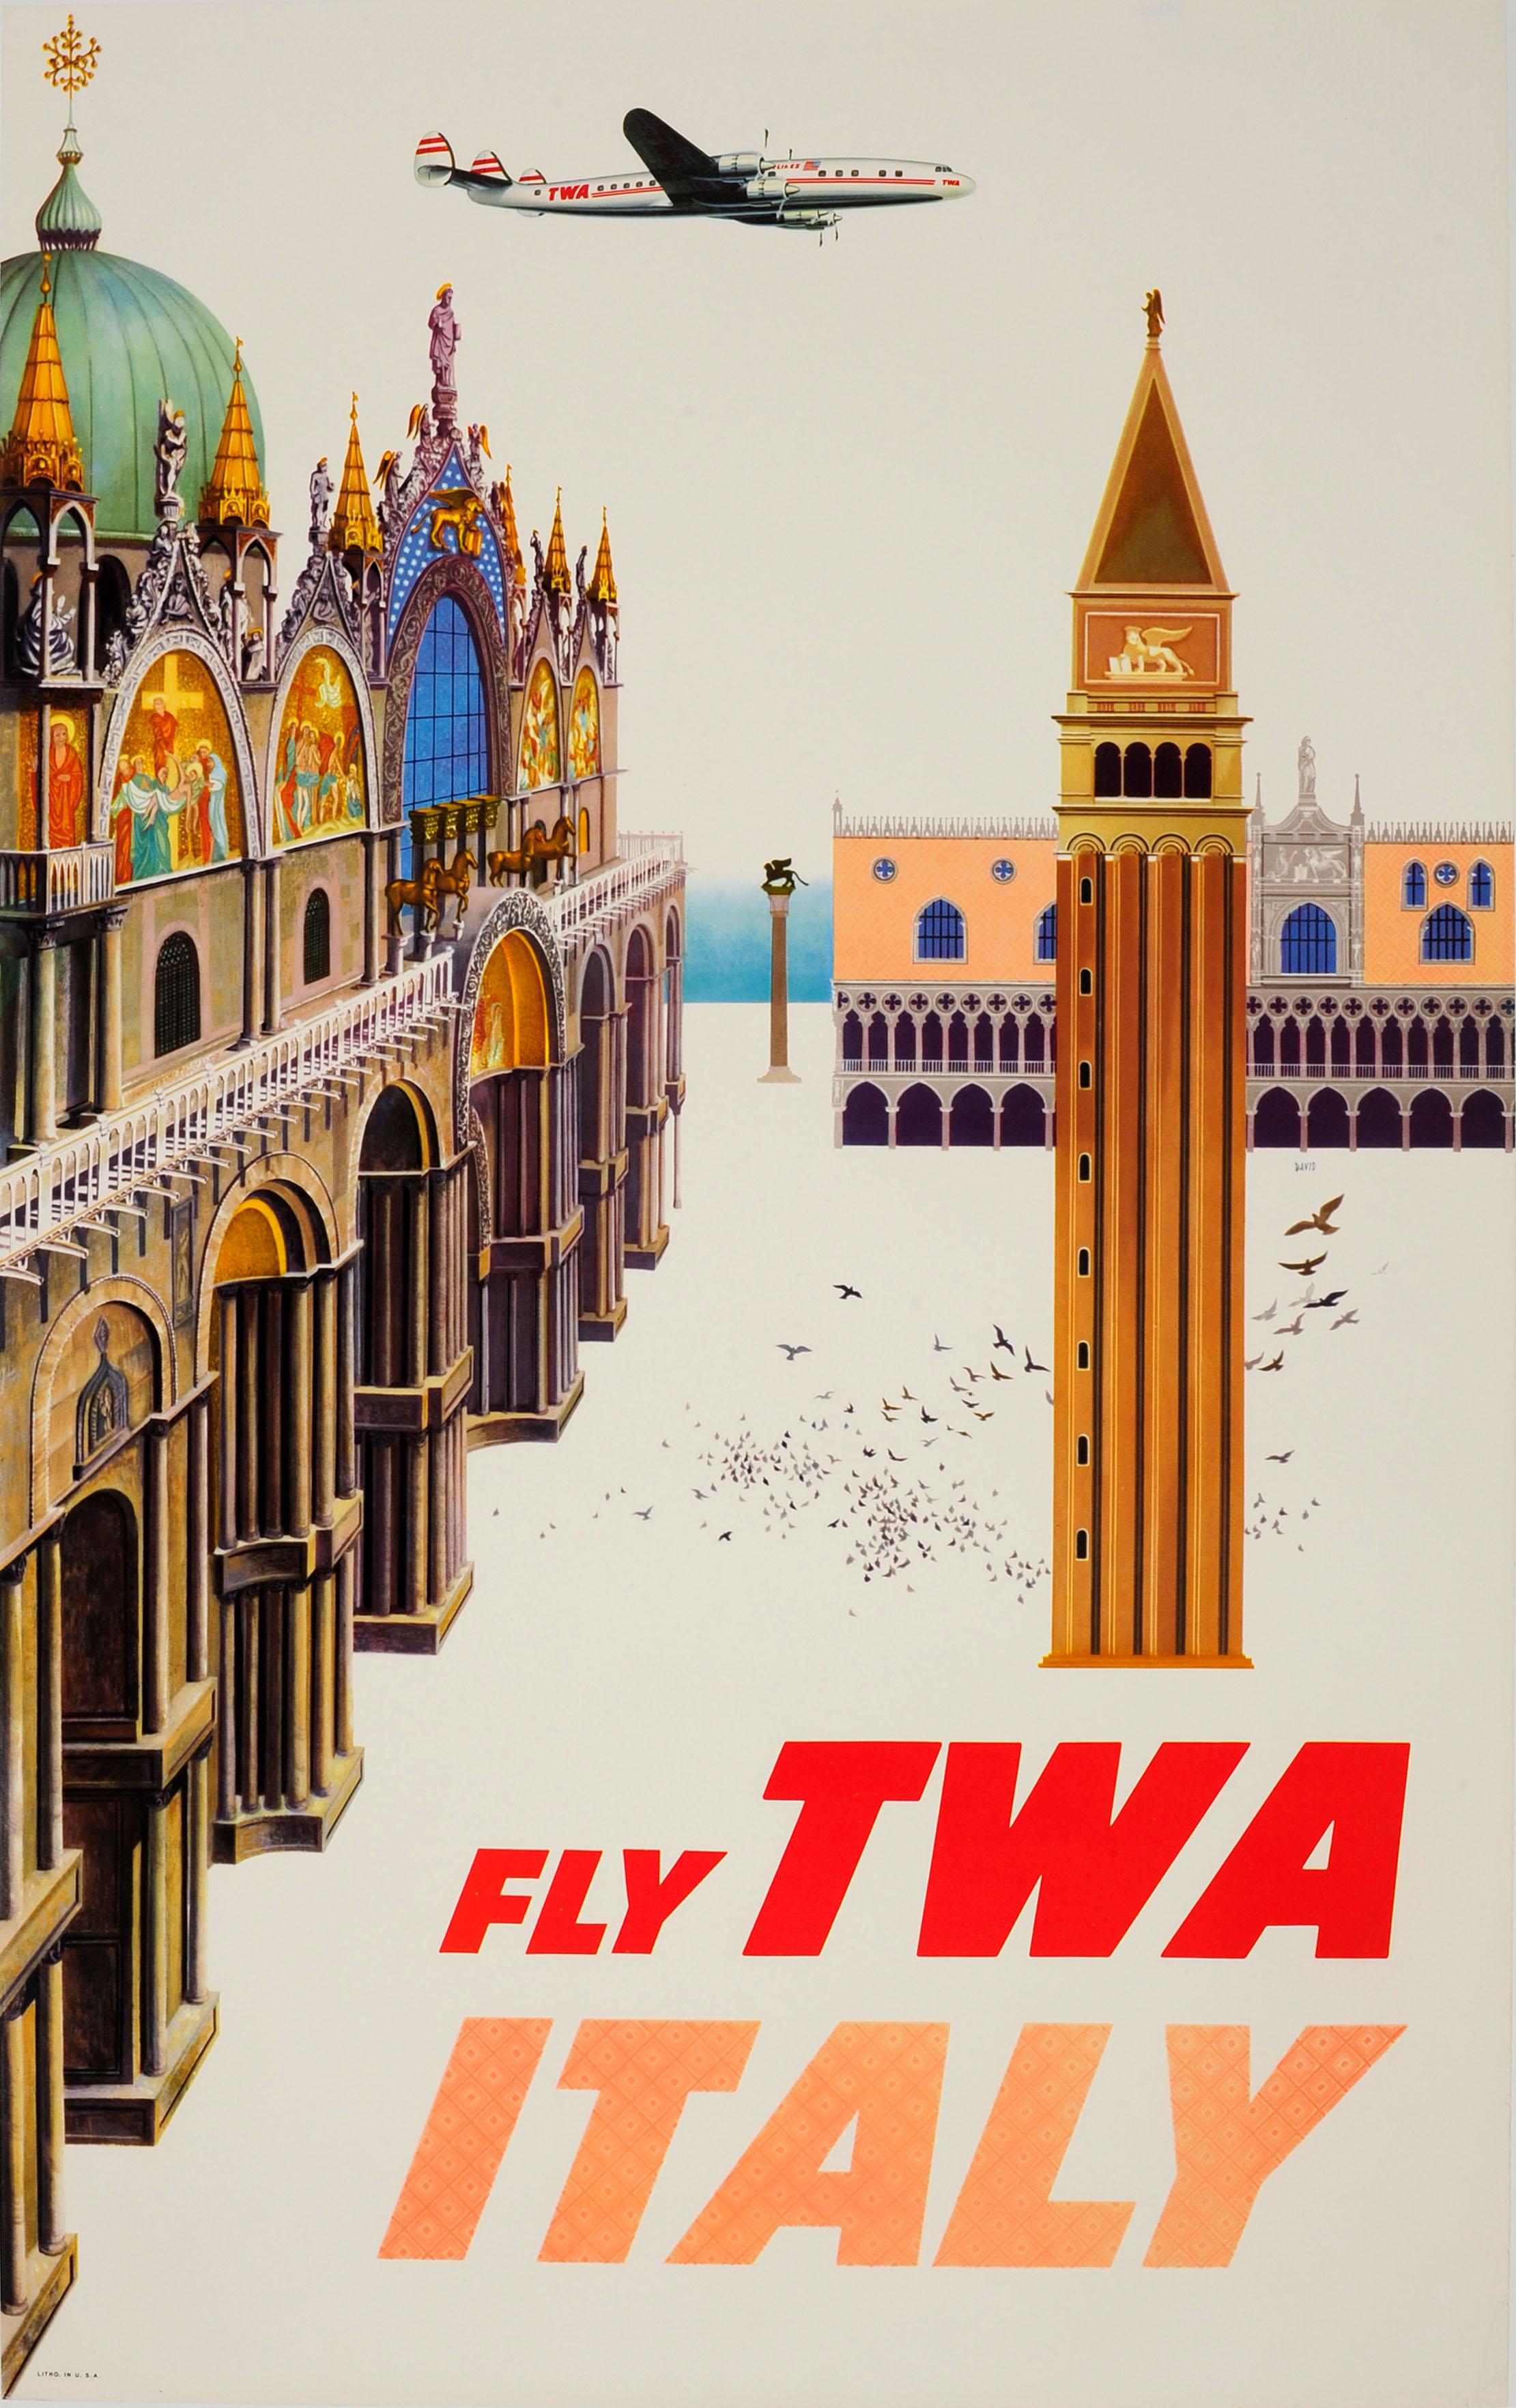 Vintage Travel/Holiday Poster A1A2A3A4 Sizes Fly To FLORIDA.. With T.W.A 